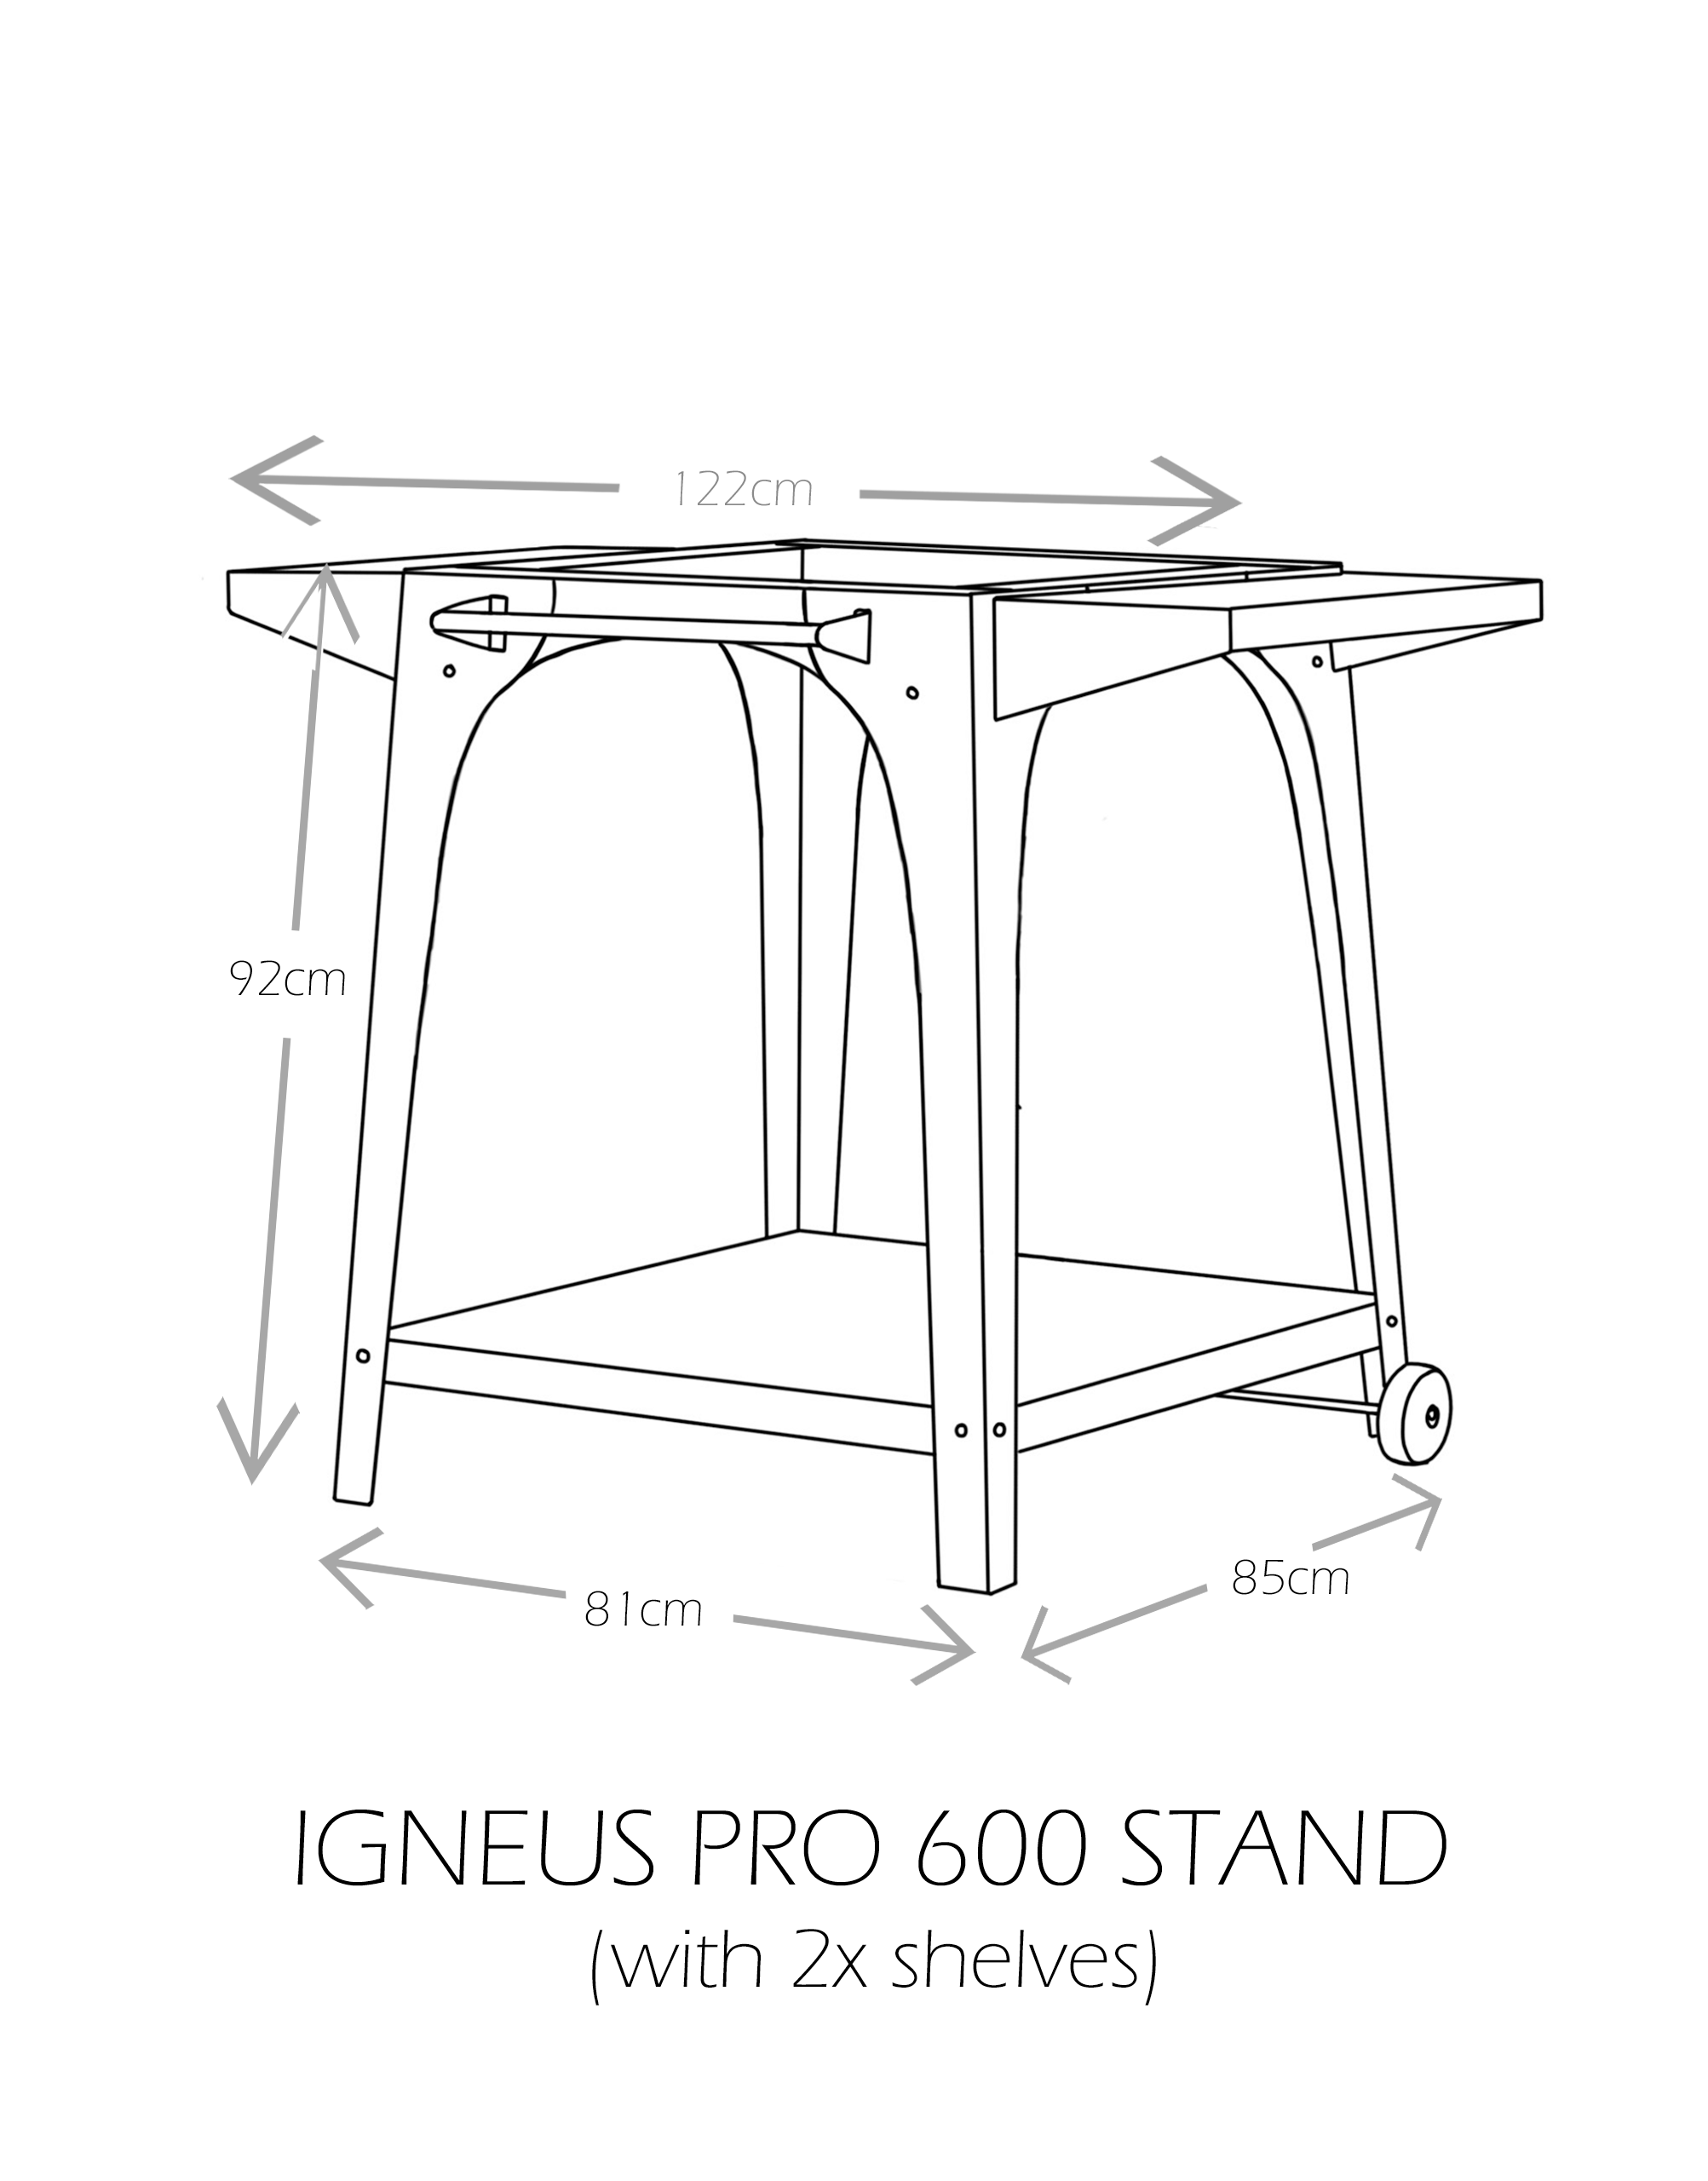 Igneus Pro 600 Stand with 2x shelves - Dimensions